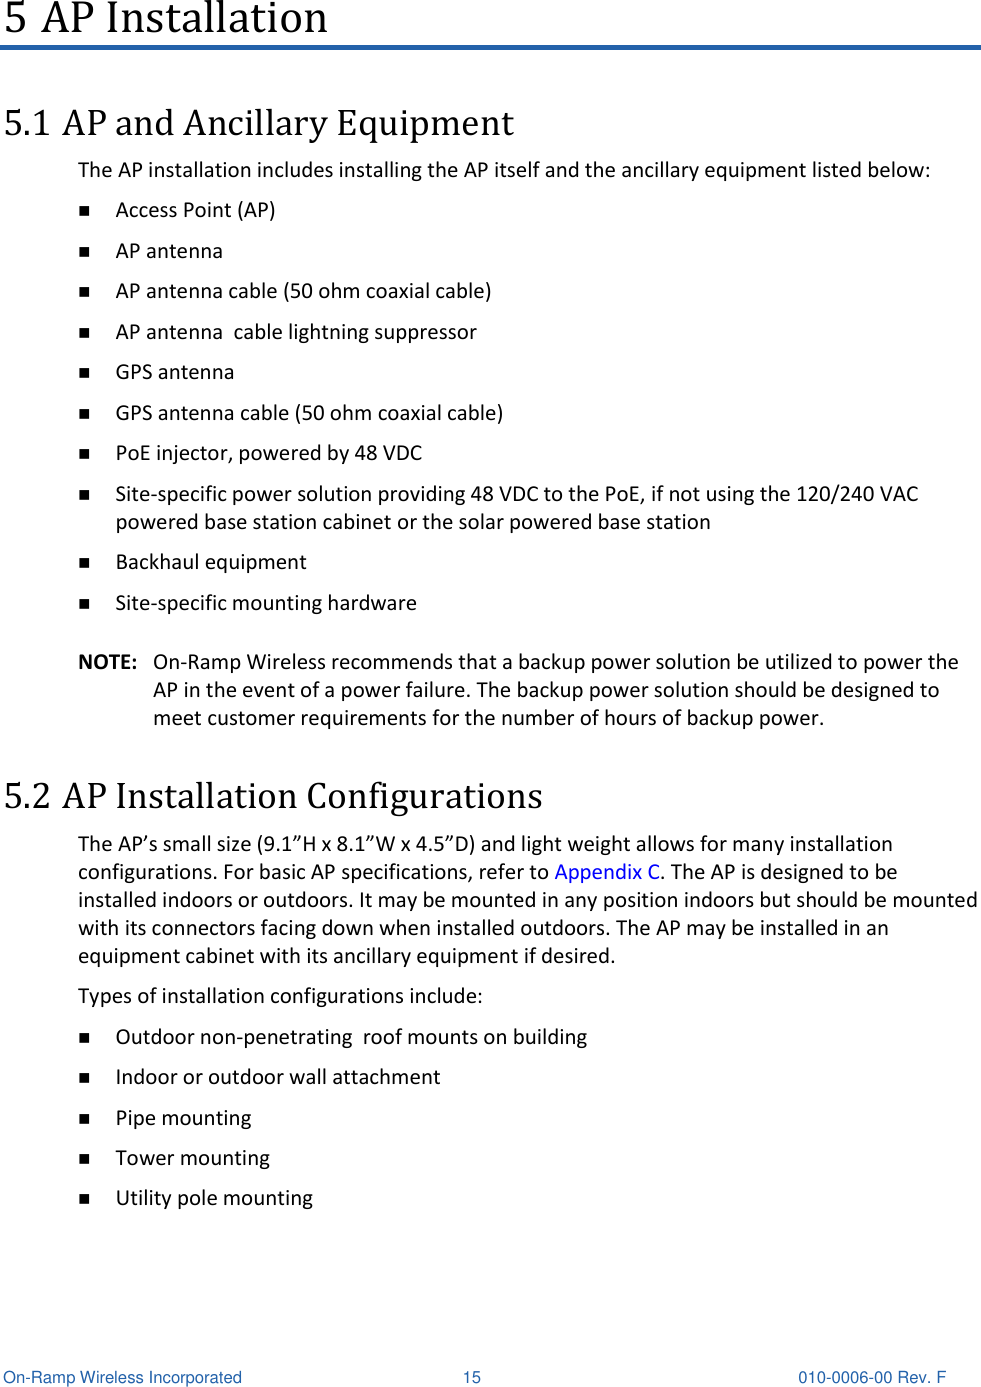  On-Ramp Wireless Incorporated  15 010-0006-00 Rev. F 5 AP Installation 5.1 AP and Ancillary Equipment The AP installation includes installing the AP itself and the ancillary equipment listed below:  Access Point (AP)  AP antenna  AP antenna cable (50 ohm coaxial cable)  AP antenna  cable lightning suppressor  GPS antenna   GPS antenna cable (50 ohm coaxial cable)  PoE injector, powered by 48 VDC  Site-specific power solution providing 48 VDC to the PoE, if not using the 120/240 VAC powered base station cabinet or the solar powered base station  Backhaul equipment  Site-specific mounting hardware  NOTE: On-Ramp Wireless recommends that a backup power solution be utilized to power the AP in the event of a power failure. The backup power solution should be designed to meet customer requirements for the number of hours of backup power. 5.2 AP Installation Configurations The AP’s small size (9.1”H x 8.1”W x 4.5”D) and light weight allows for many installation configurations. For basic AP specifications, refer to Appendix C. The AP is designed to be installed indoors or outdoors. It may be mounted in any position indoors but should be mounted with its connectors facing down when installed outdoors. The AP may be installed in an equipment cabinet with its ancillary equipment if desired.  Types of installation configurations include:  Outdoor non-penetrating  roof mounts on building   Indoor or outdoor wall attachment  Pipe mounting  Tower mounting  Utility pole mounting 